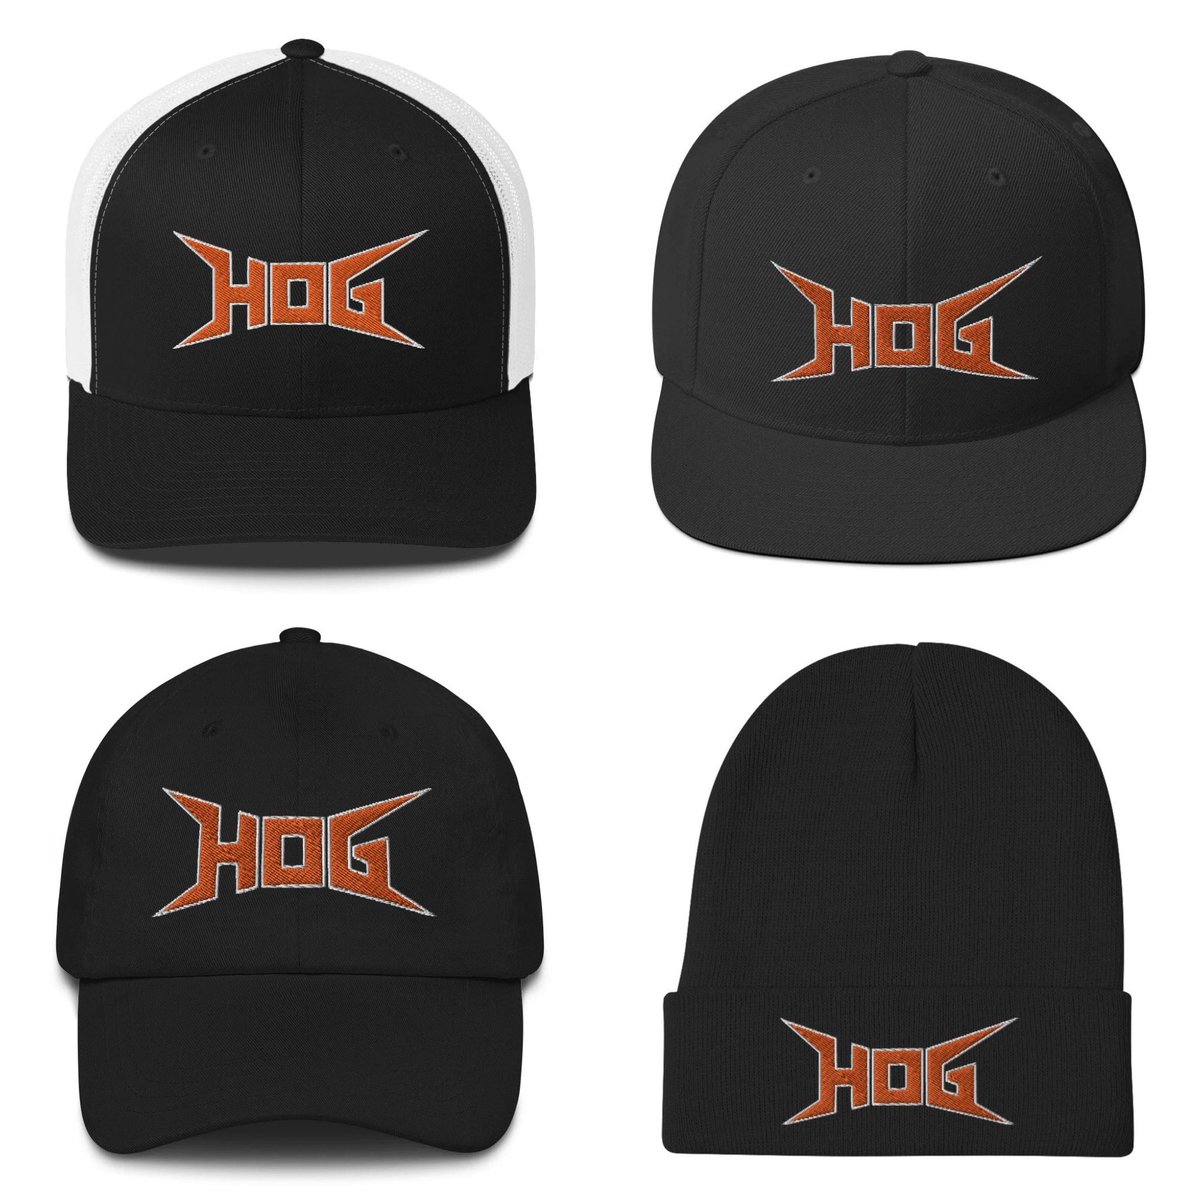 Dad caps, truckers, snapbacks, and beanies available at #SHOPHOG Represent @HOGwrestling everywhere this Fall season. shophog.net #houseofglory #hogwrestling #wrestling #nyc